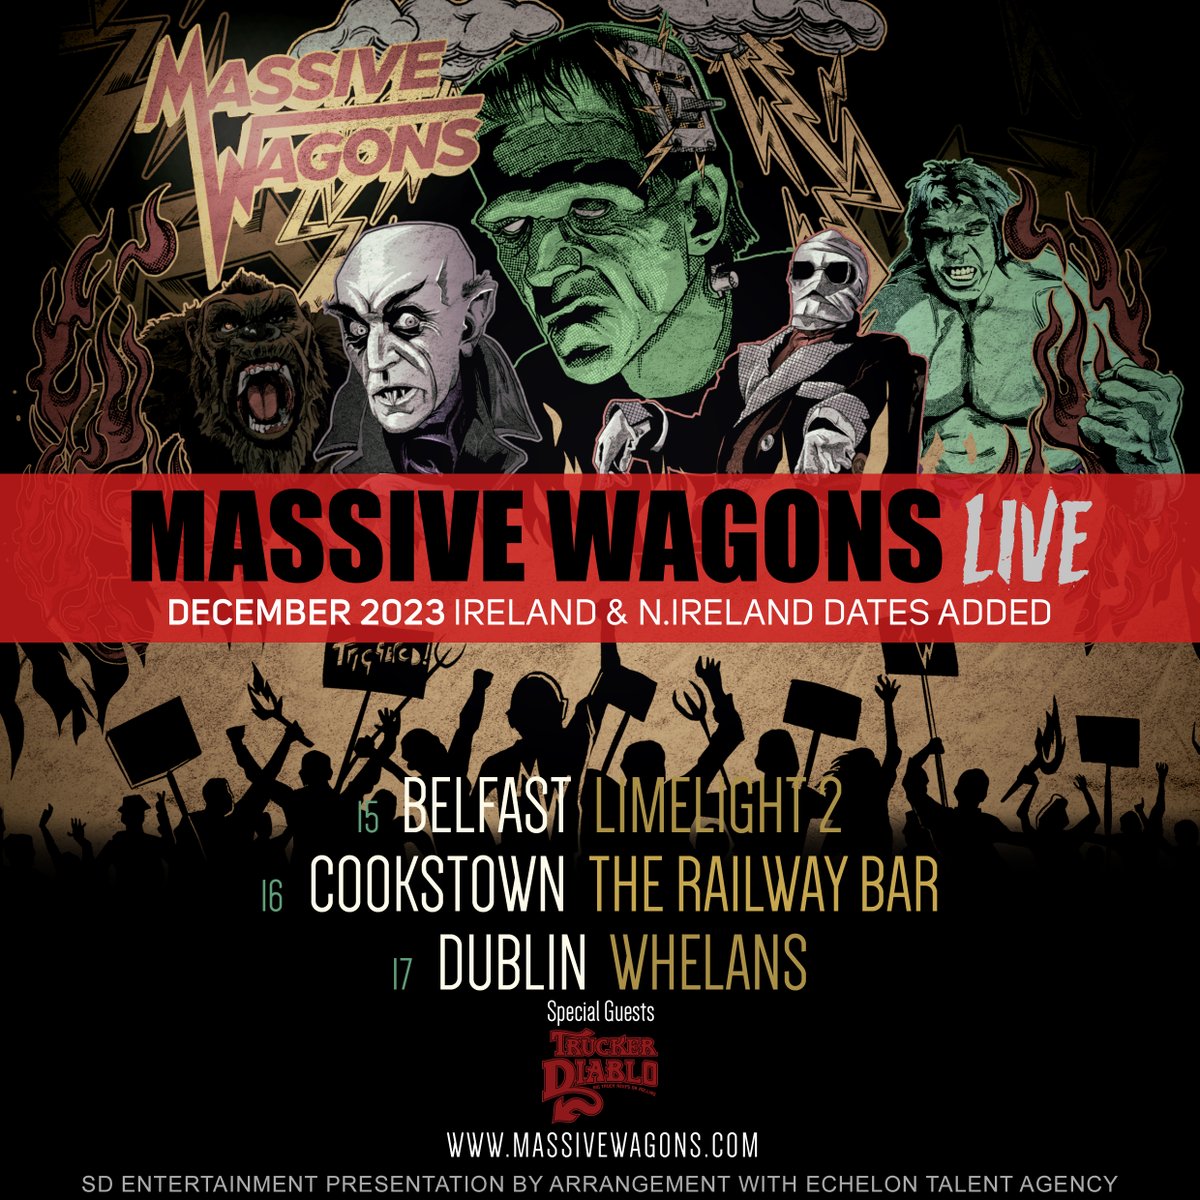 Don't miss out on tickets @MassiveWagons w/ Special Guests in The Mighty Big Truck themselves @truckerdiablo this December for THREE shows across the Island. Fri 15 - @LimelightNI Sat 16 - Railway Bar, Cookstown Sun 17 - @whelanslive Tickets from MassiveWagons.com